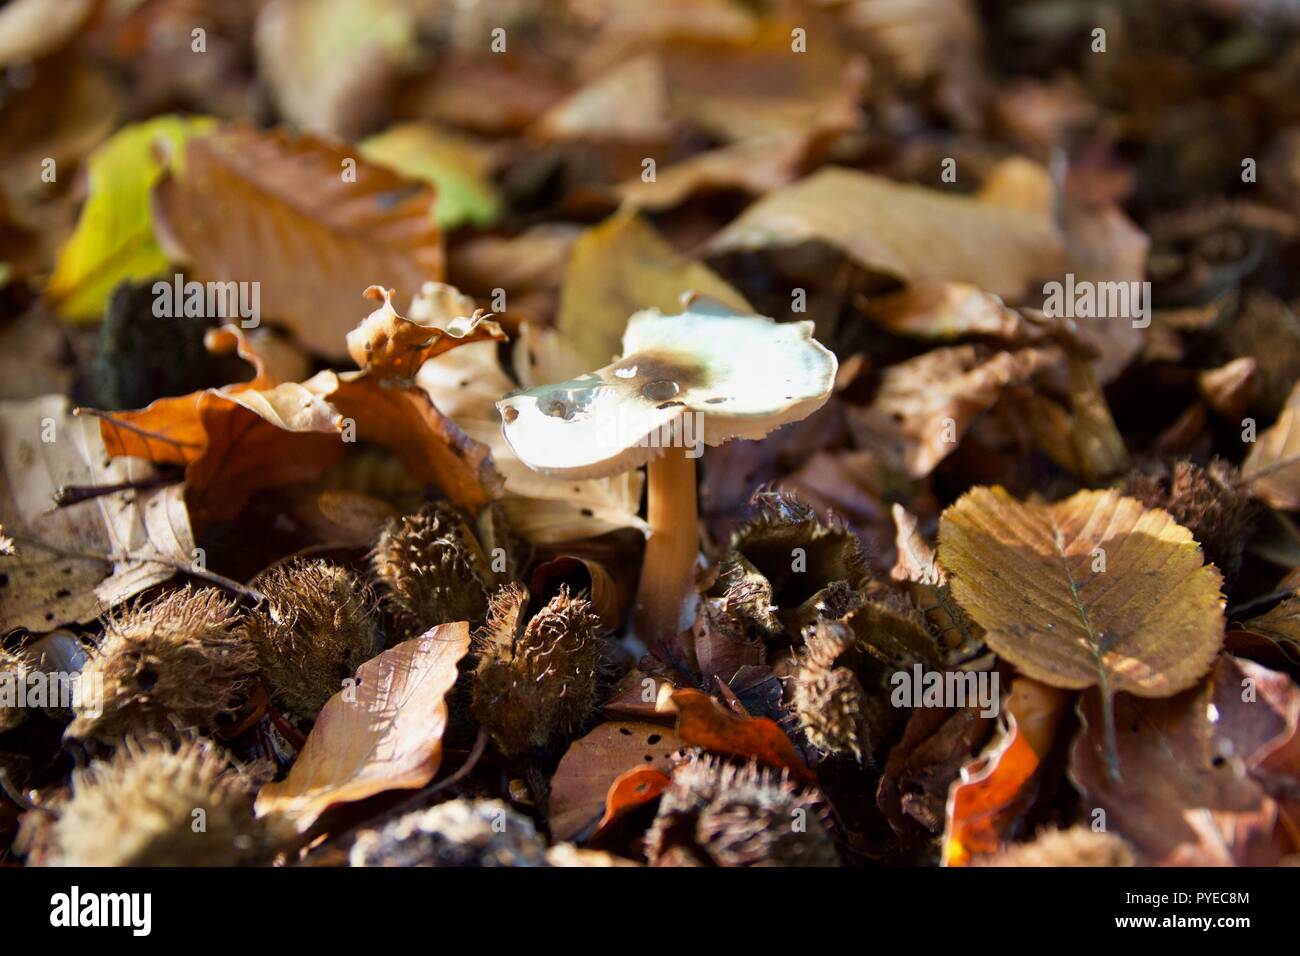 One white mushroom in autumn leaves in Epping Forest, England Stock Photo